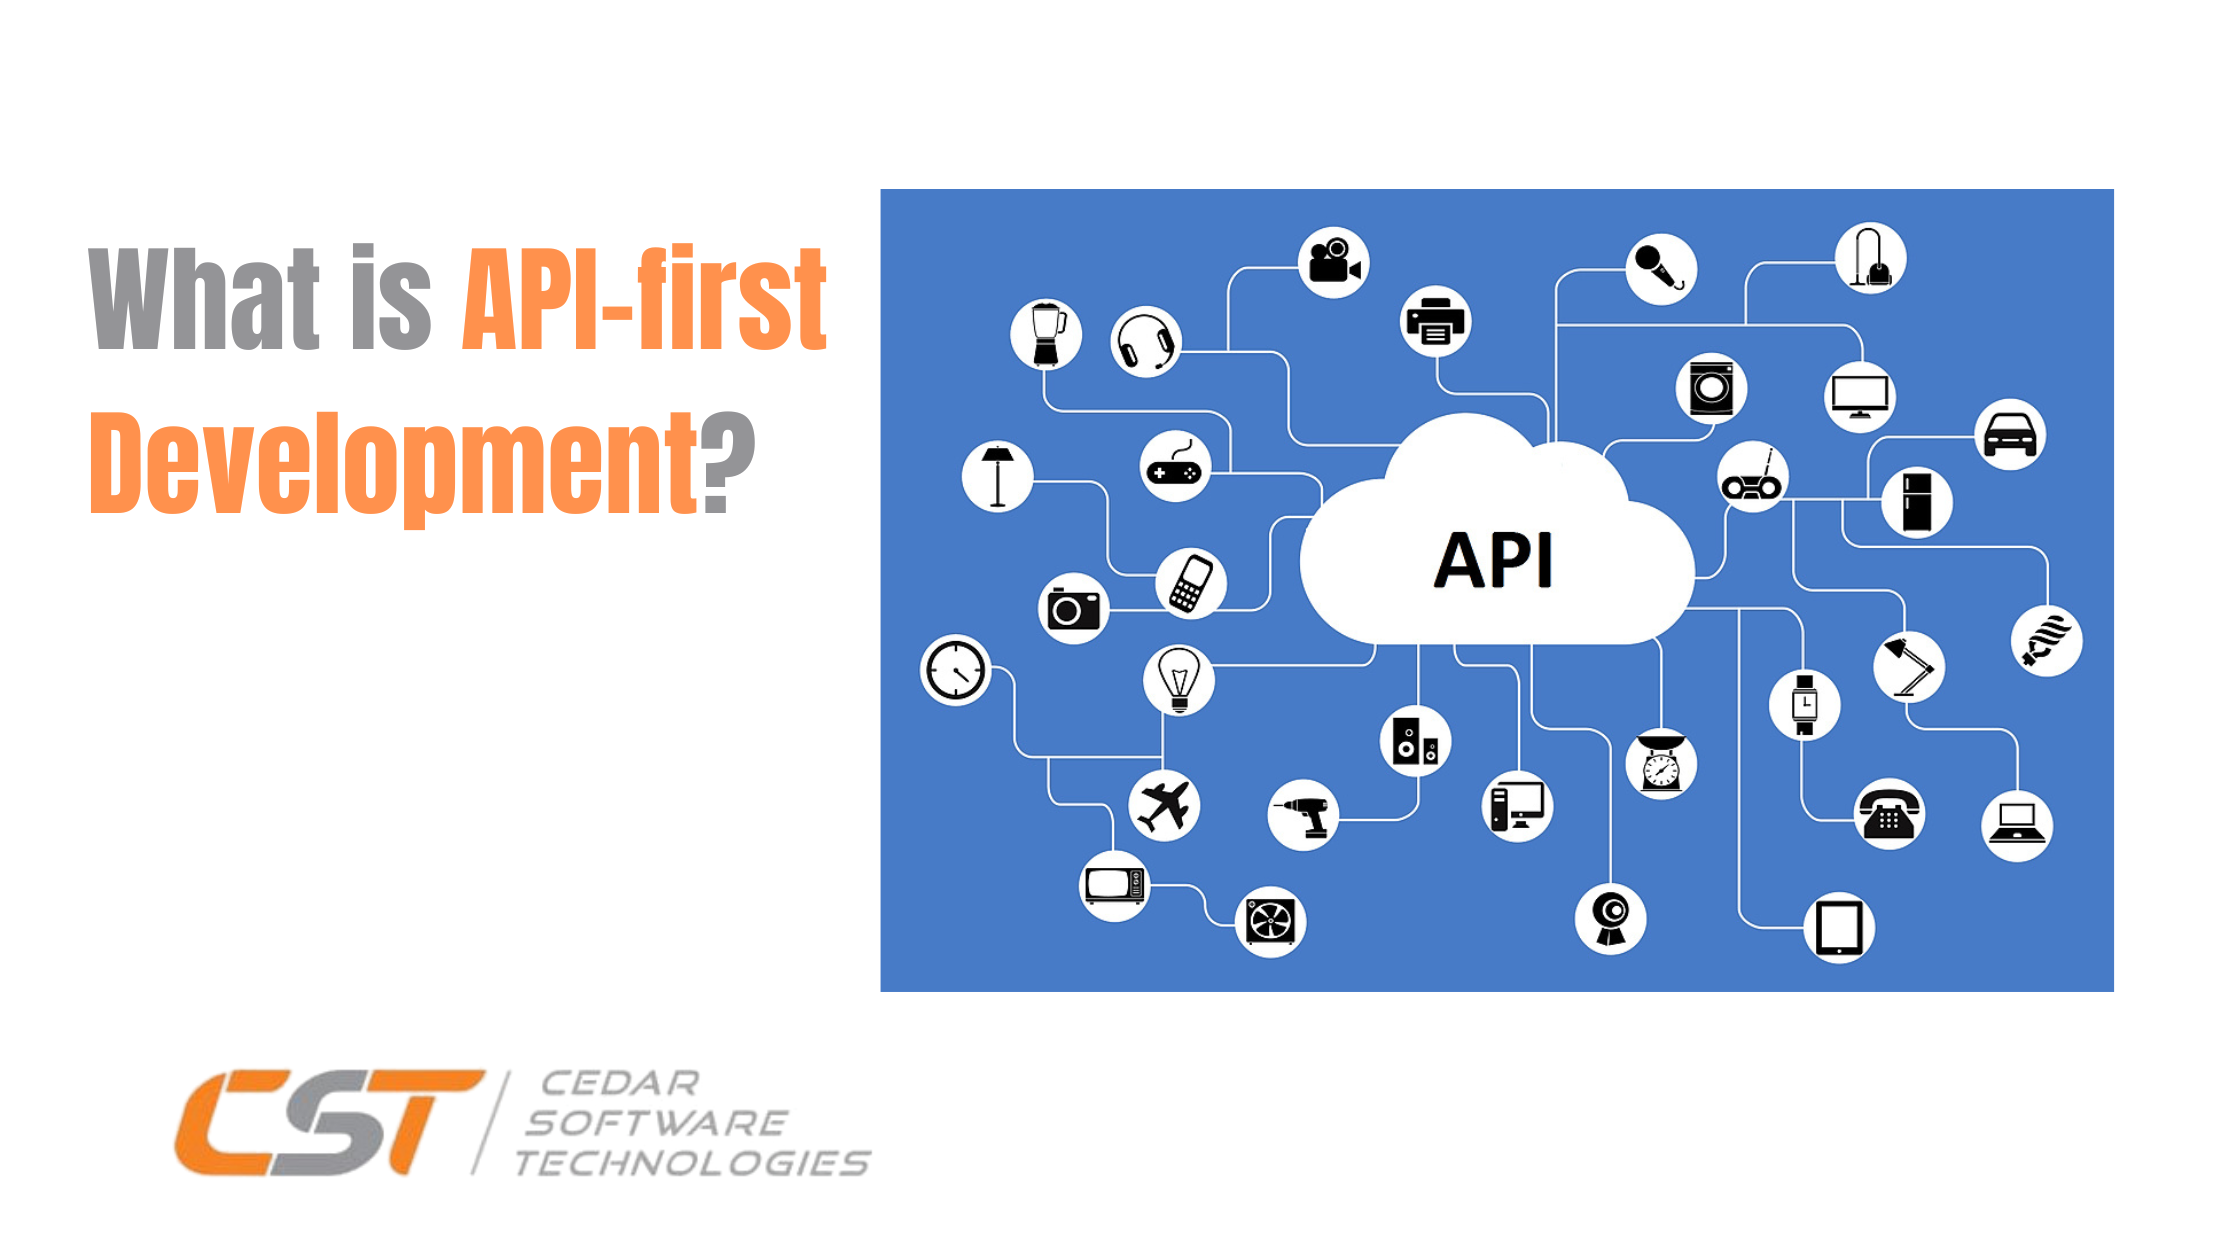 What is API-first Development?